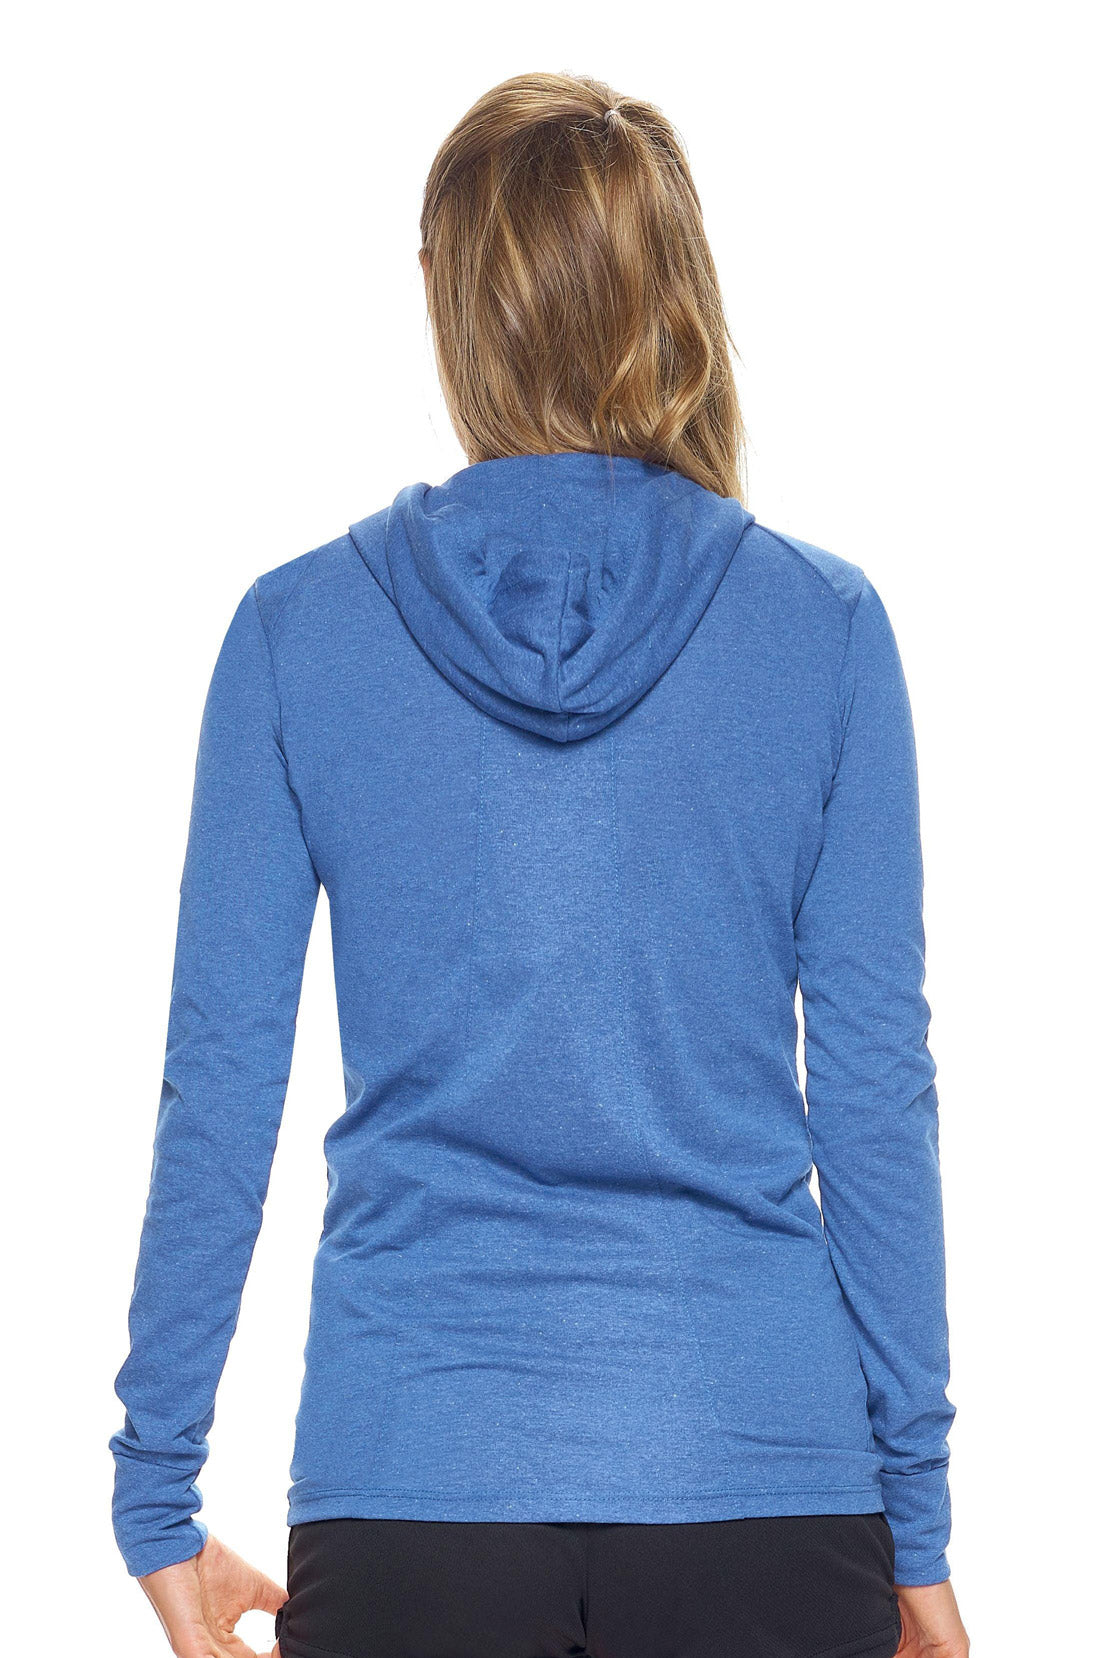 Expert Apparel Women's Hoodie Shirt Performance Made in USA in Dark Heather Royal Blue Image 3#color_dark-heather-royal